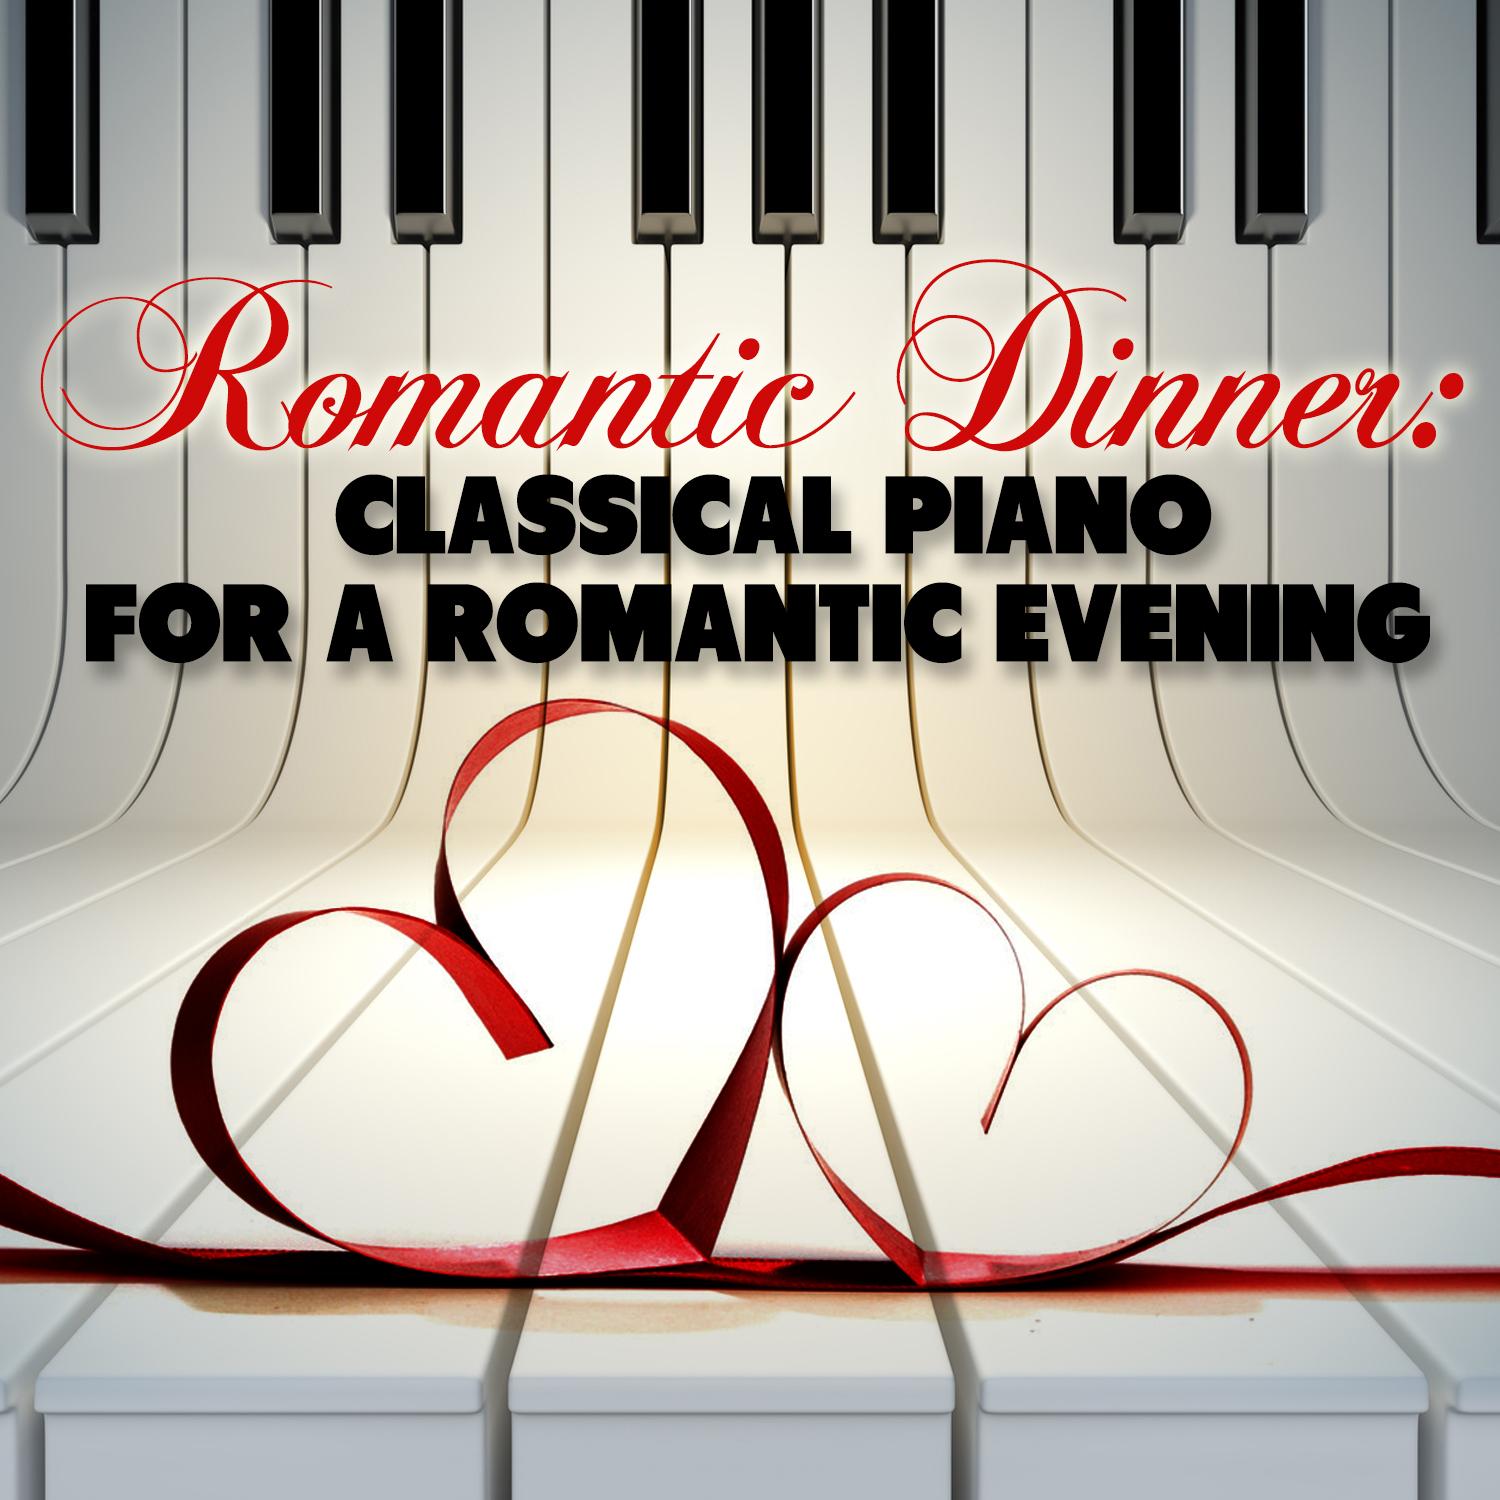 Romantic Dinner: Classical Piano for a Romantic Evening